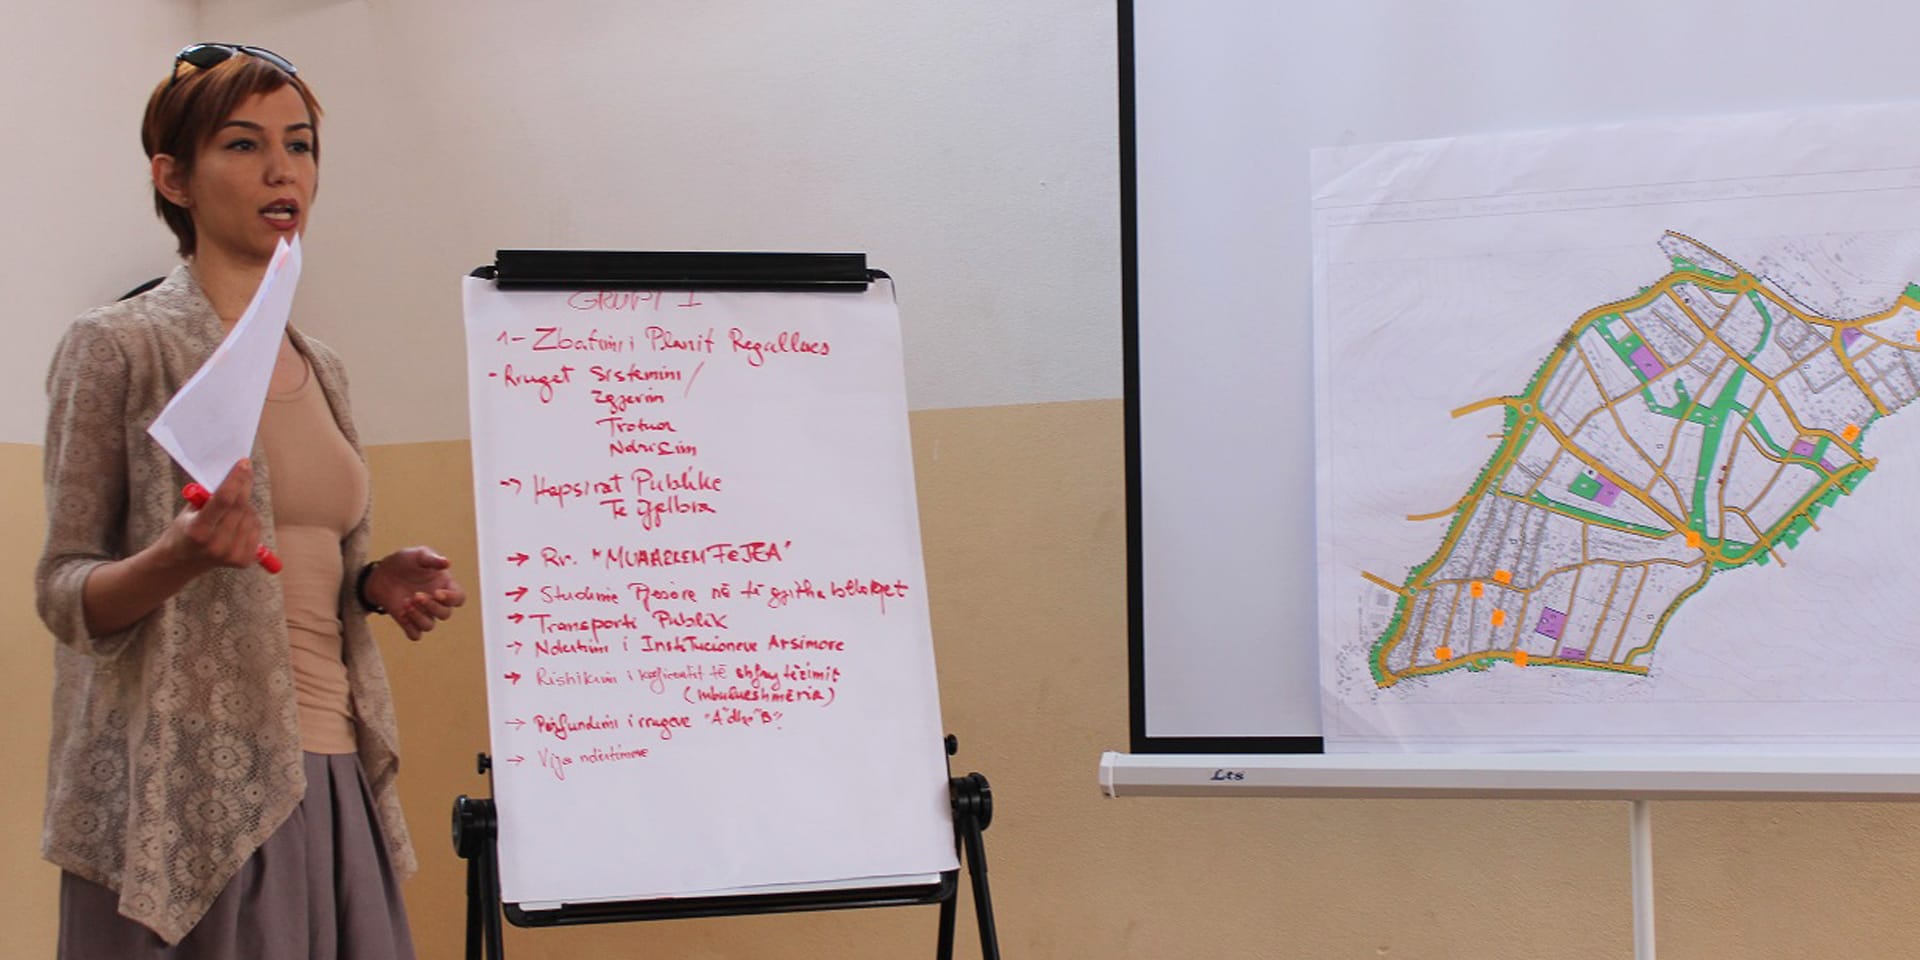 A woman giving a presentation that includes a whiteboard and a blueprint of a city.